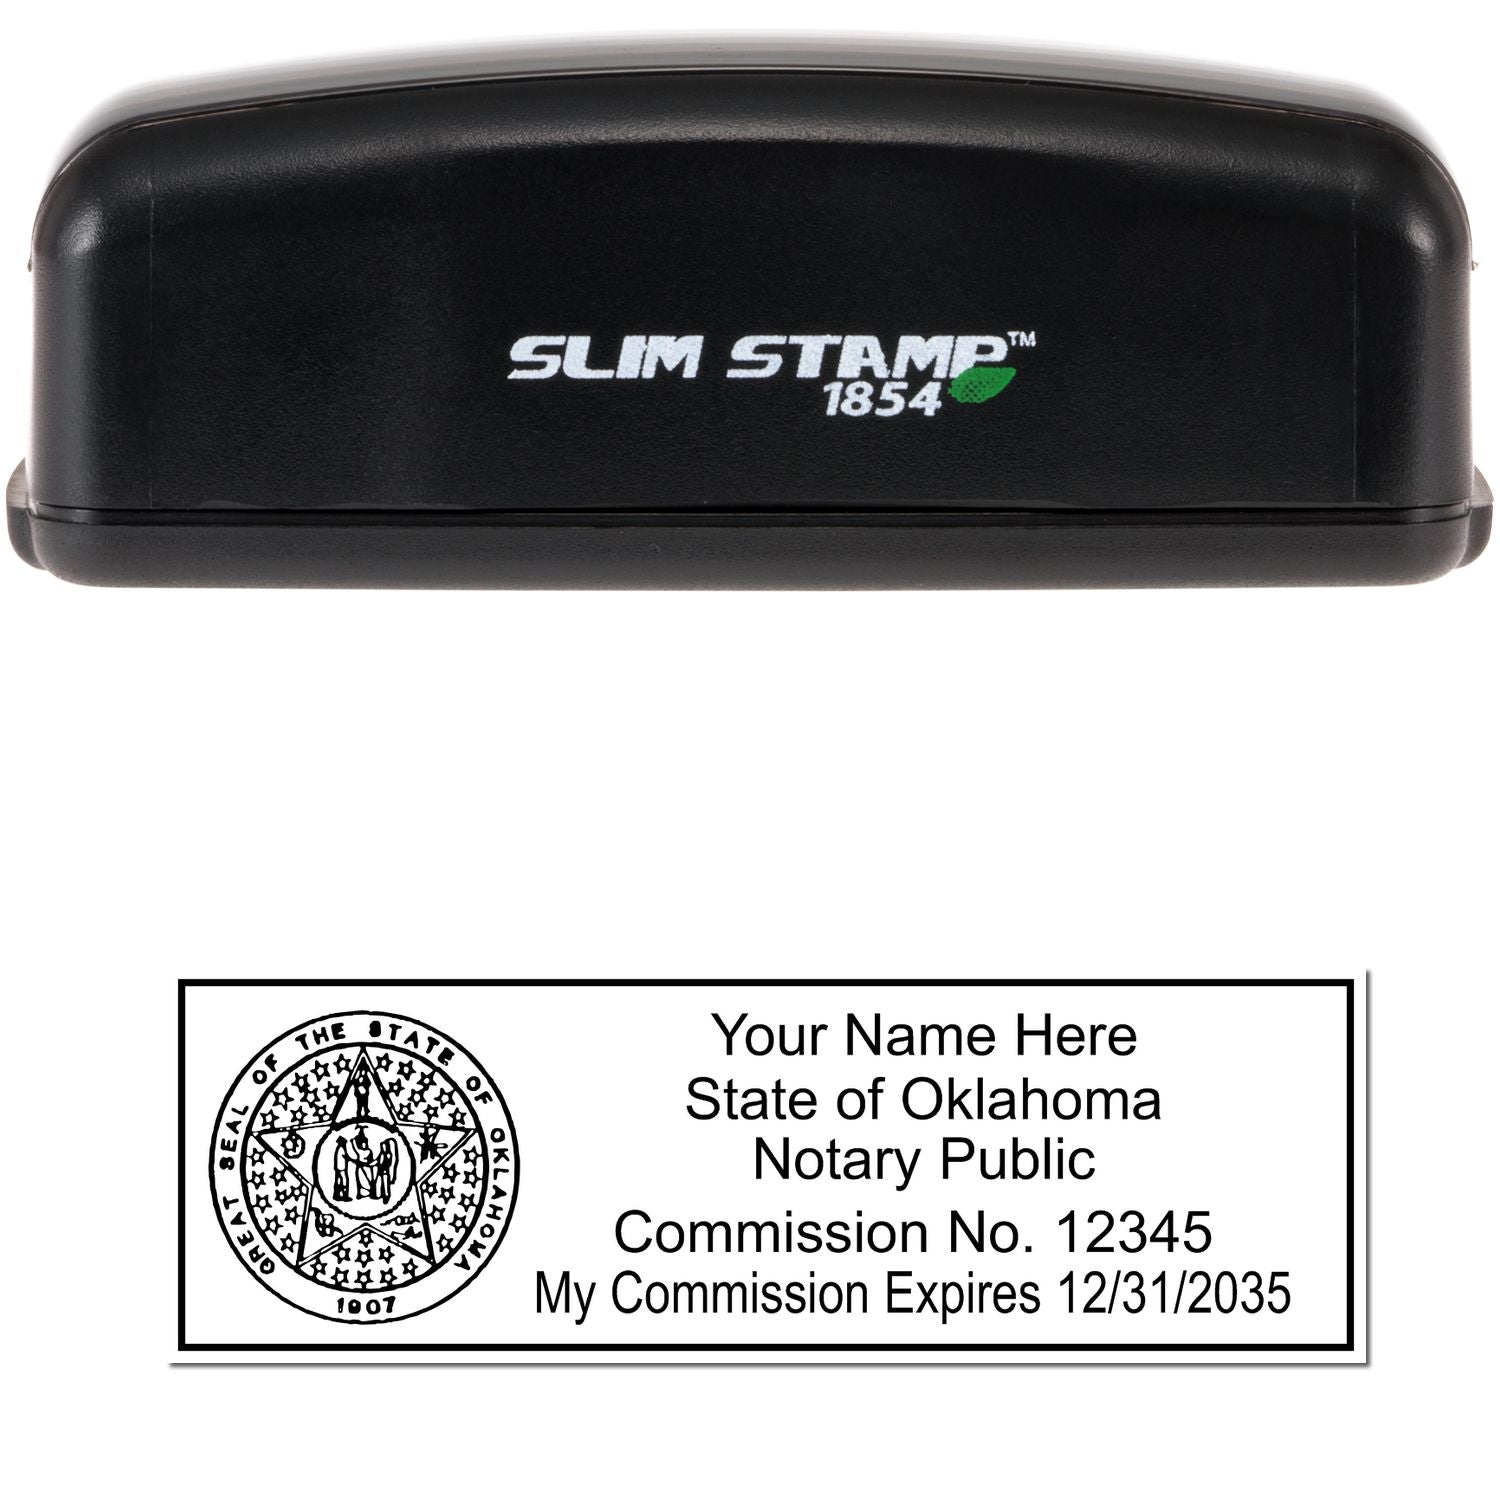 The main image for the Slim Pre-Inked State Seal Notary Stamp for Oklahoma depicting a sample of the imprint and electronic files